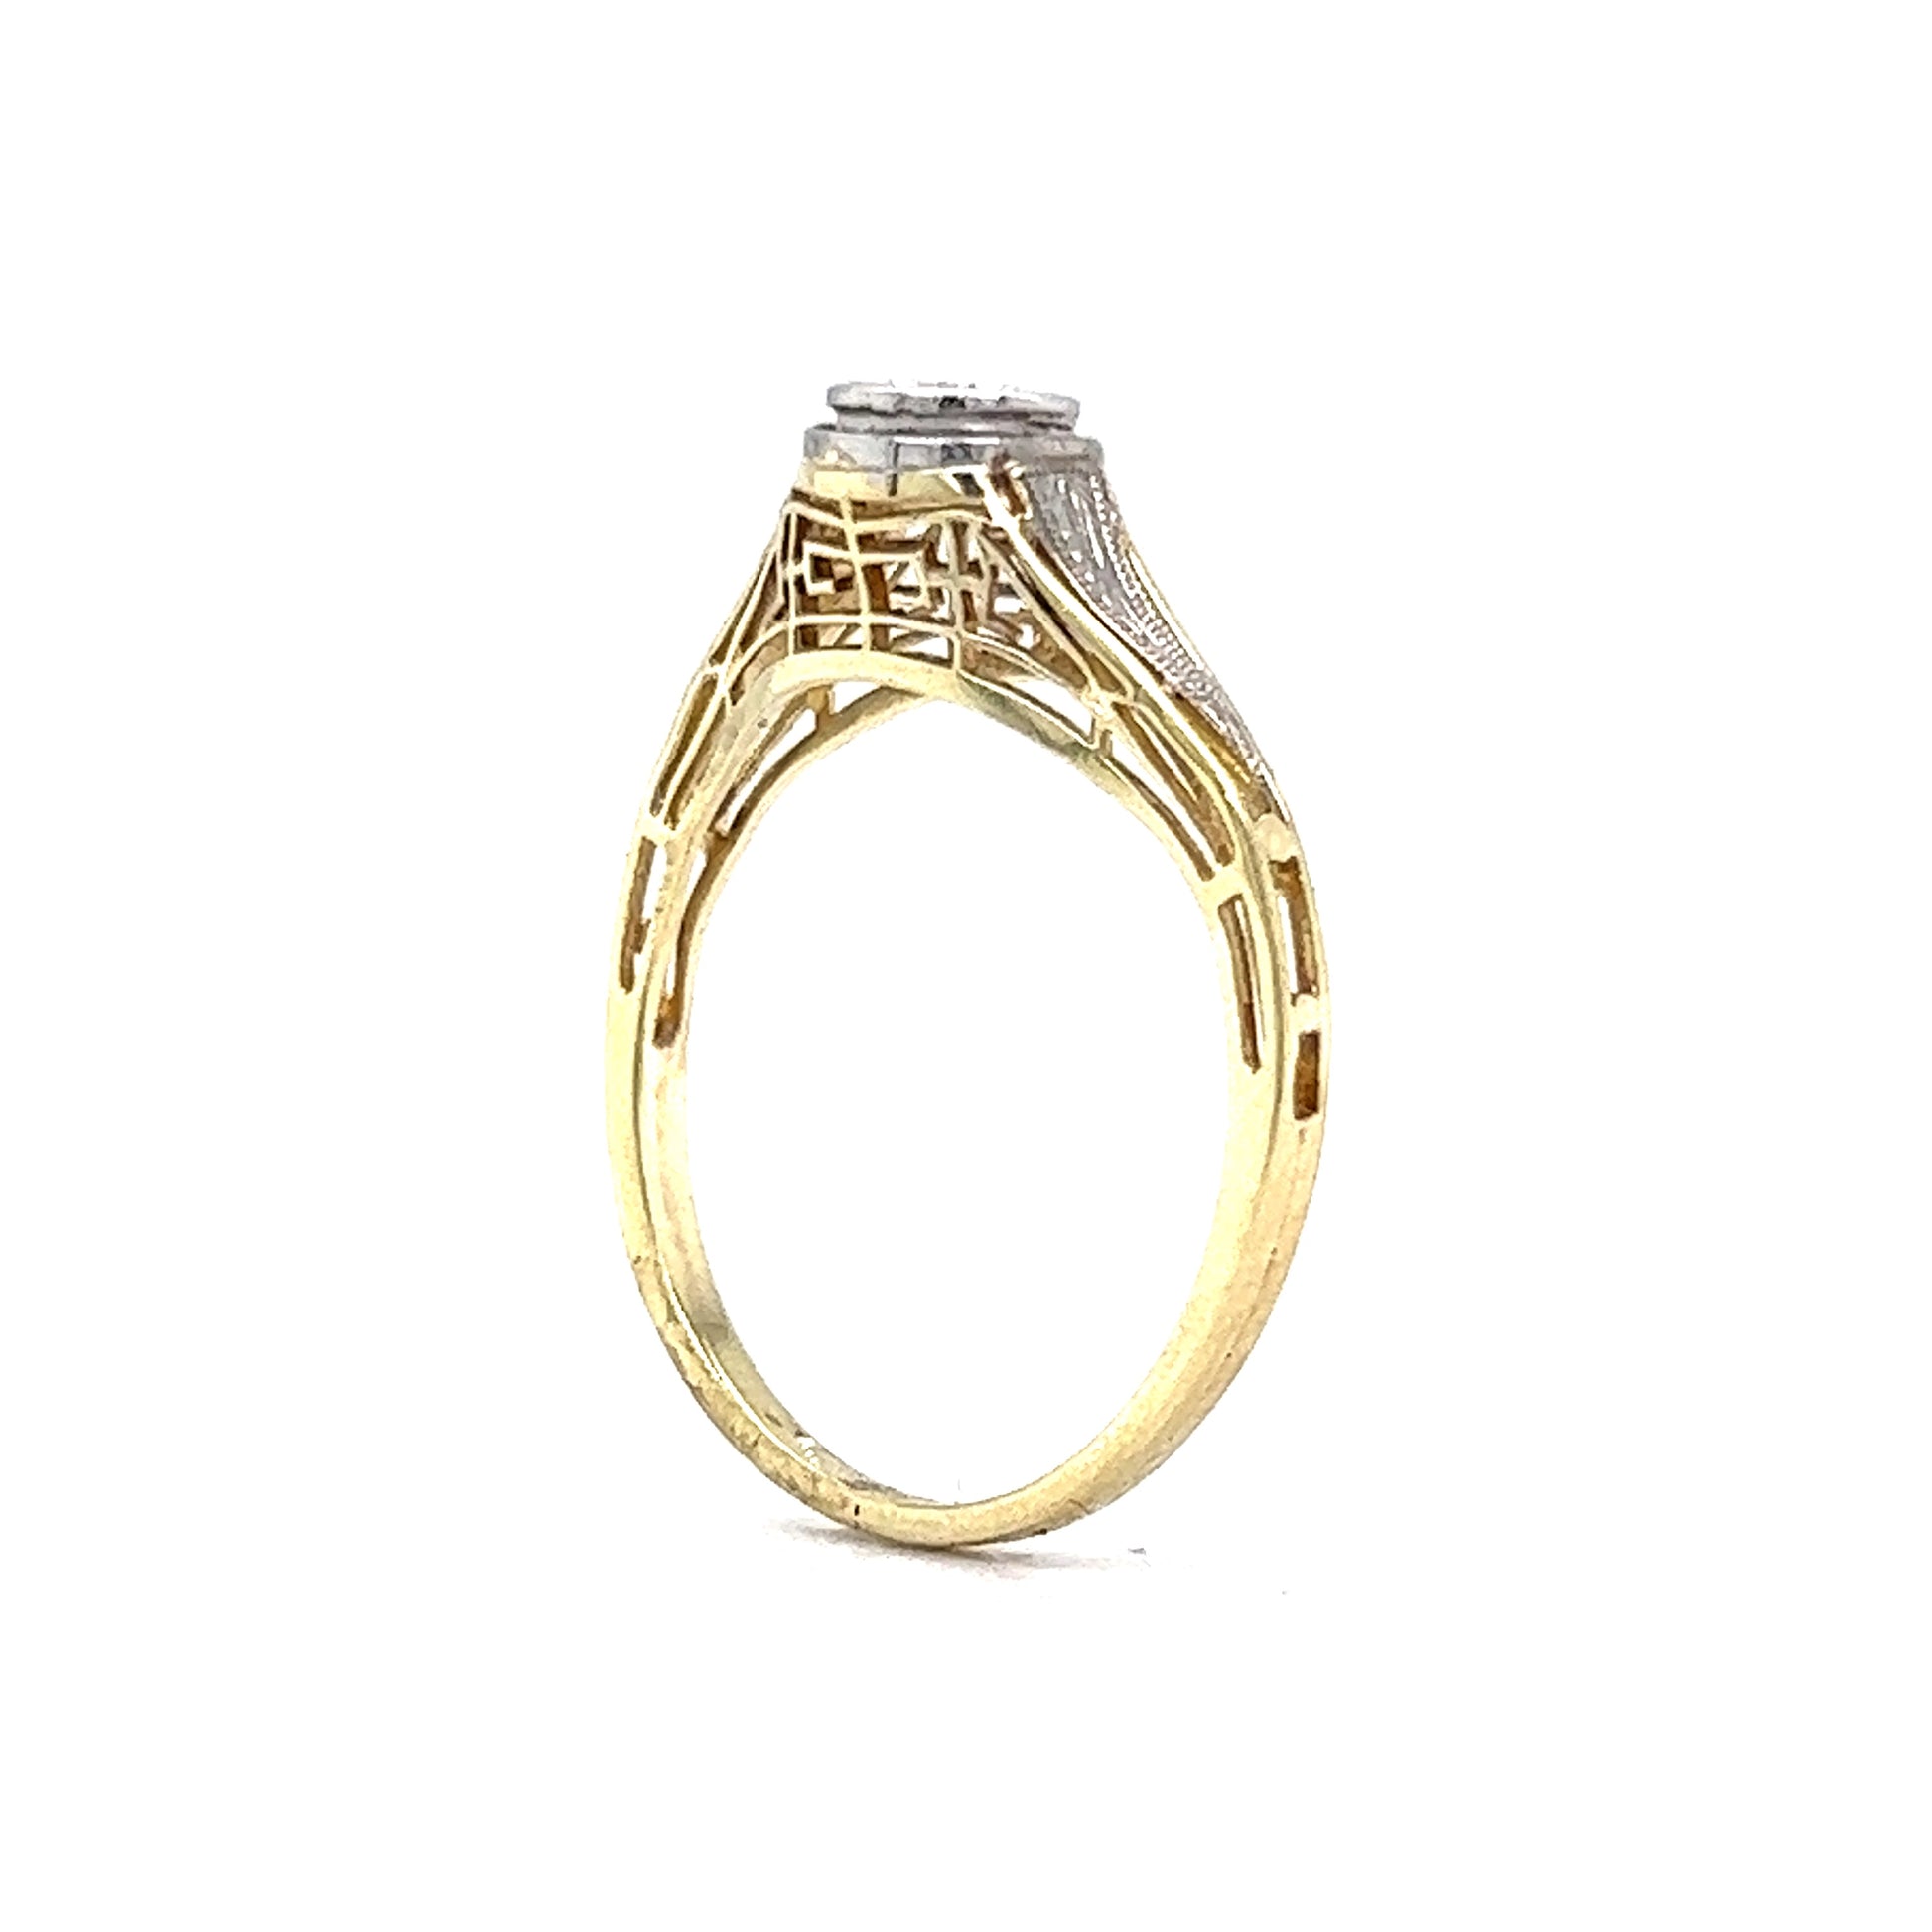 Antique Two-Tone Diamond Engagement Ring in Yellow Gold & Platinum